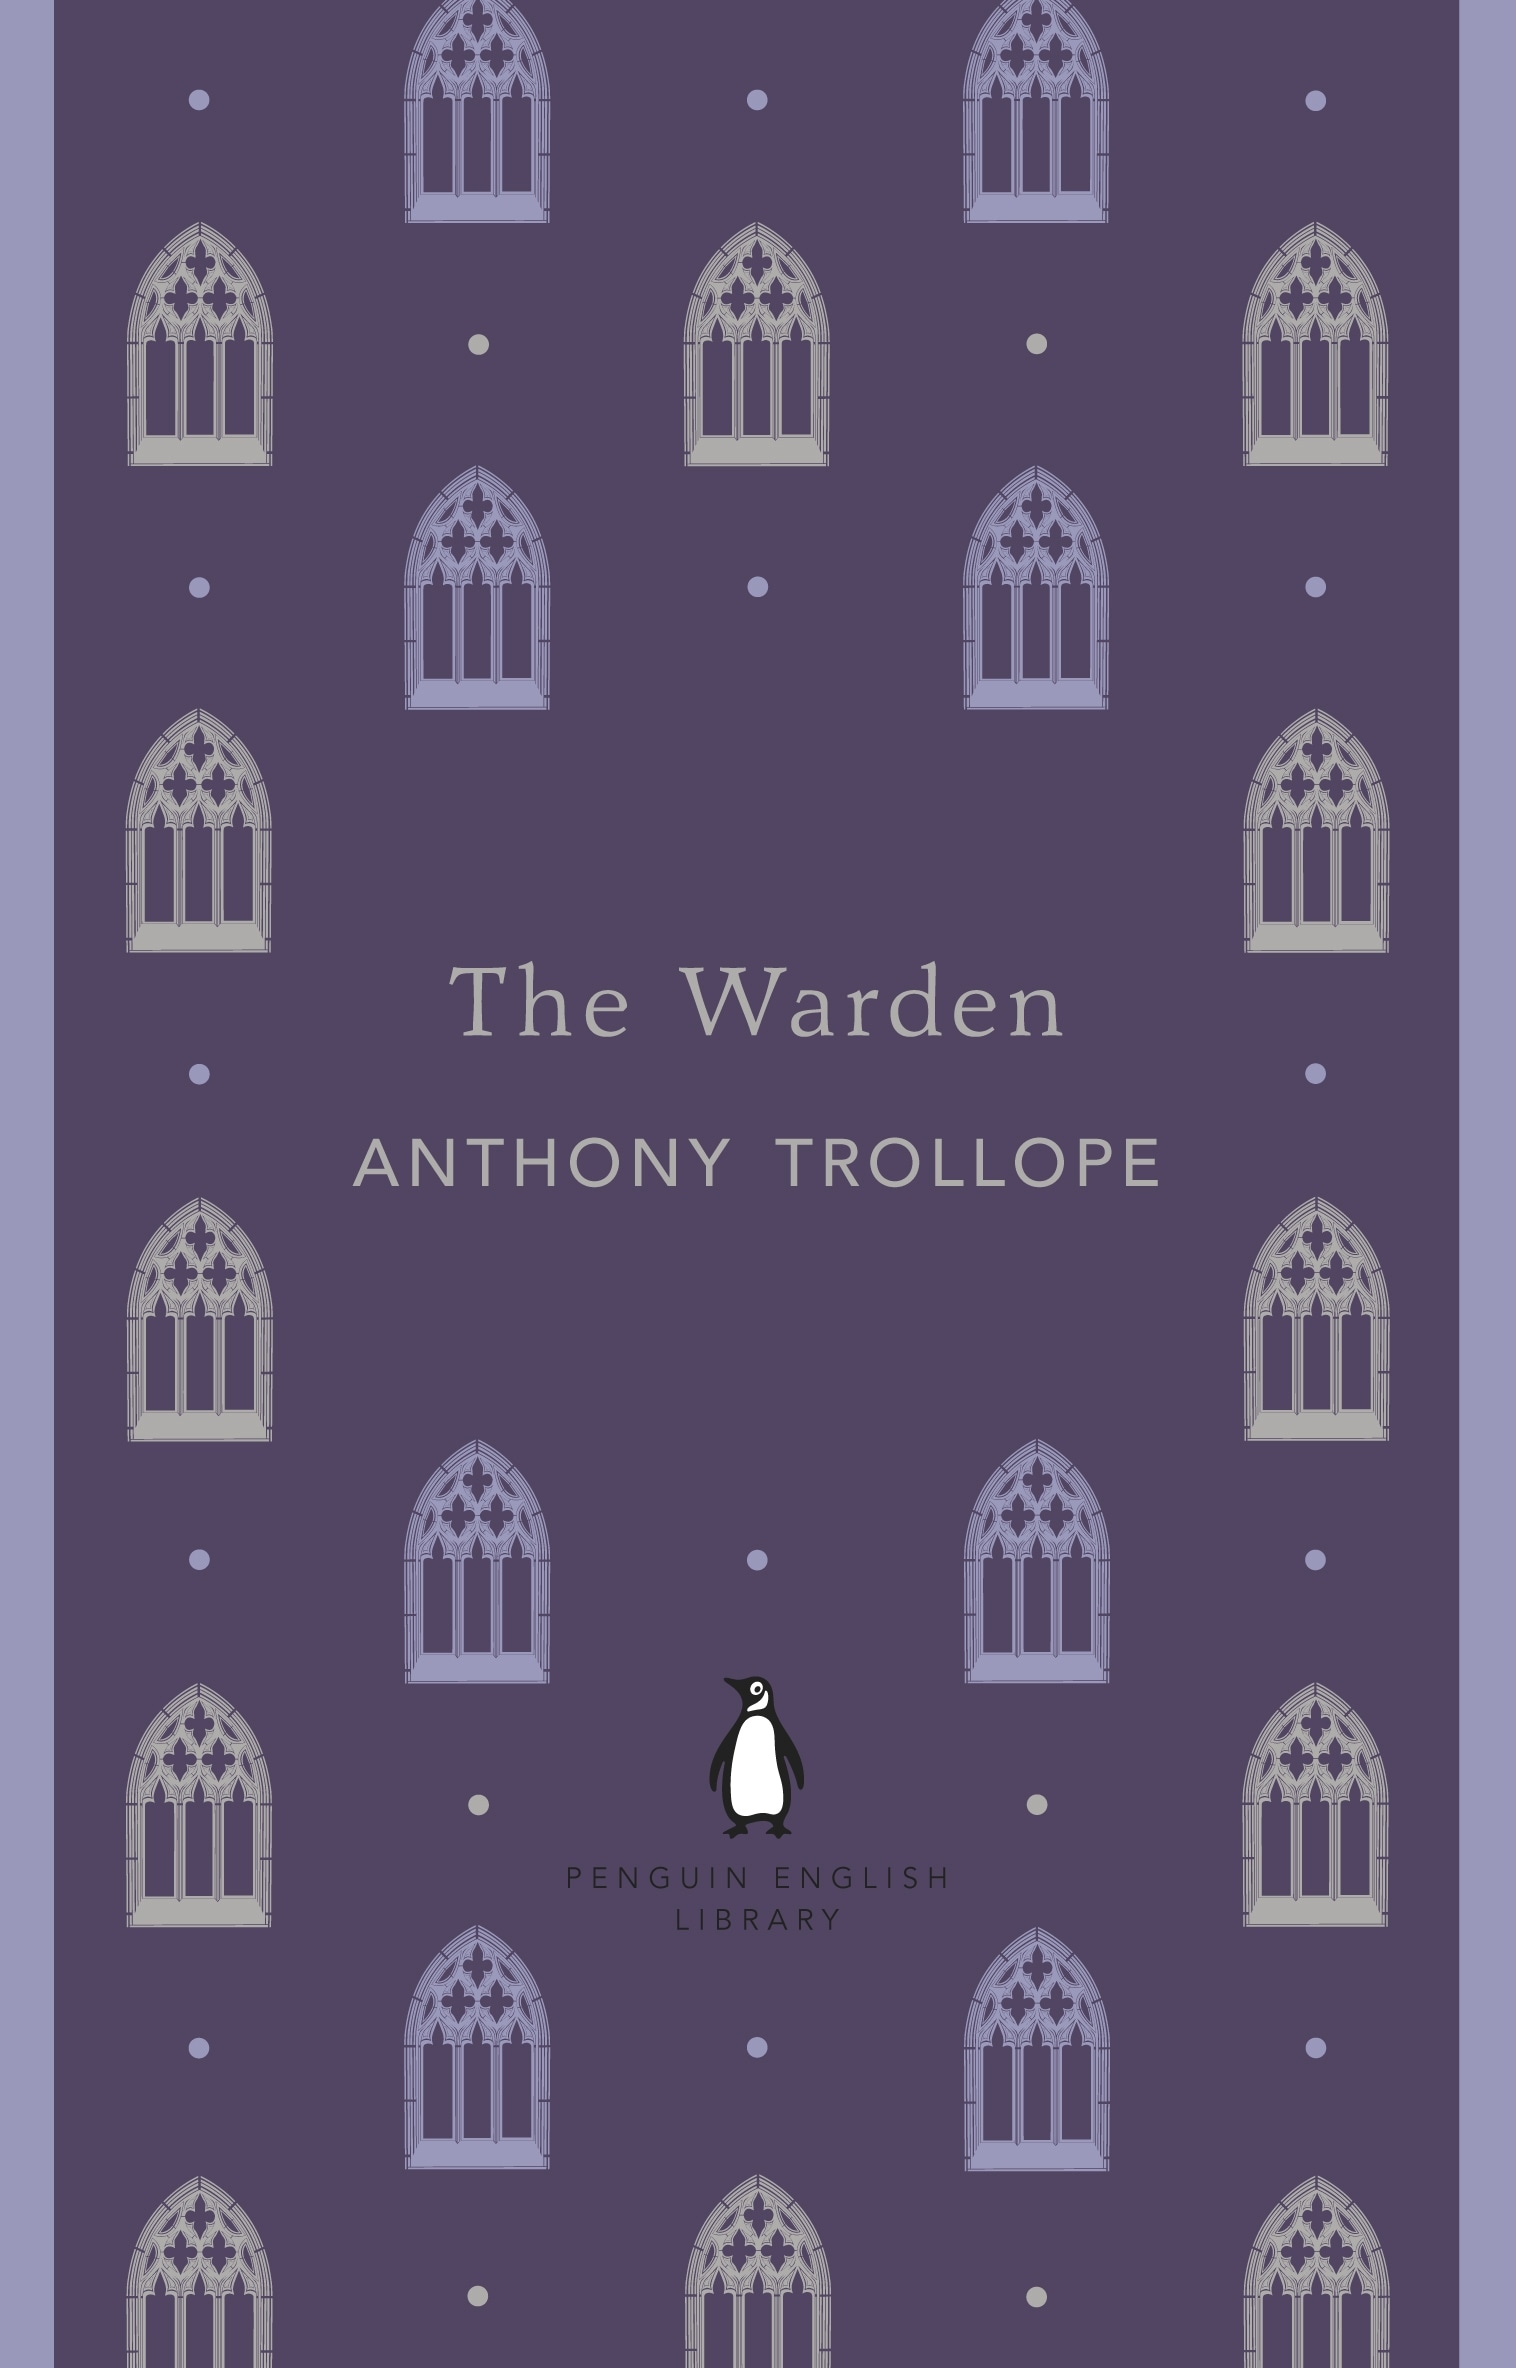 Book “The Warden” by Anthony Trollope — April 26, 2012